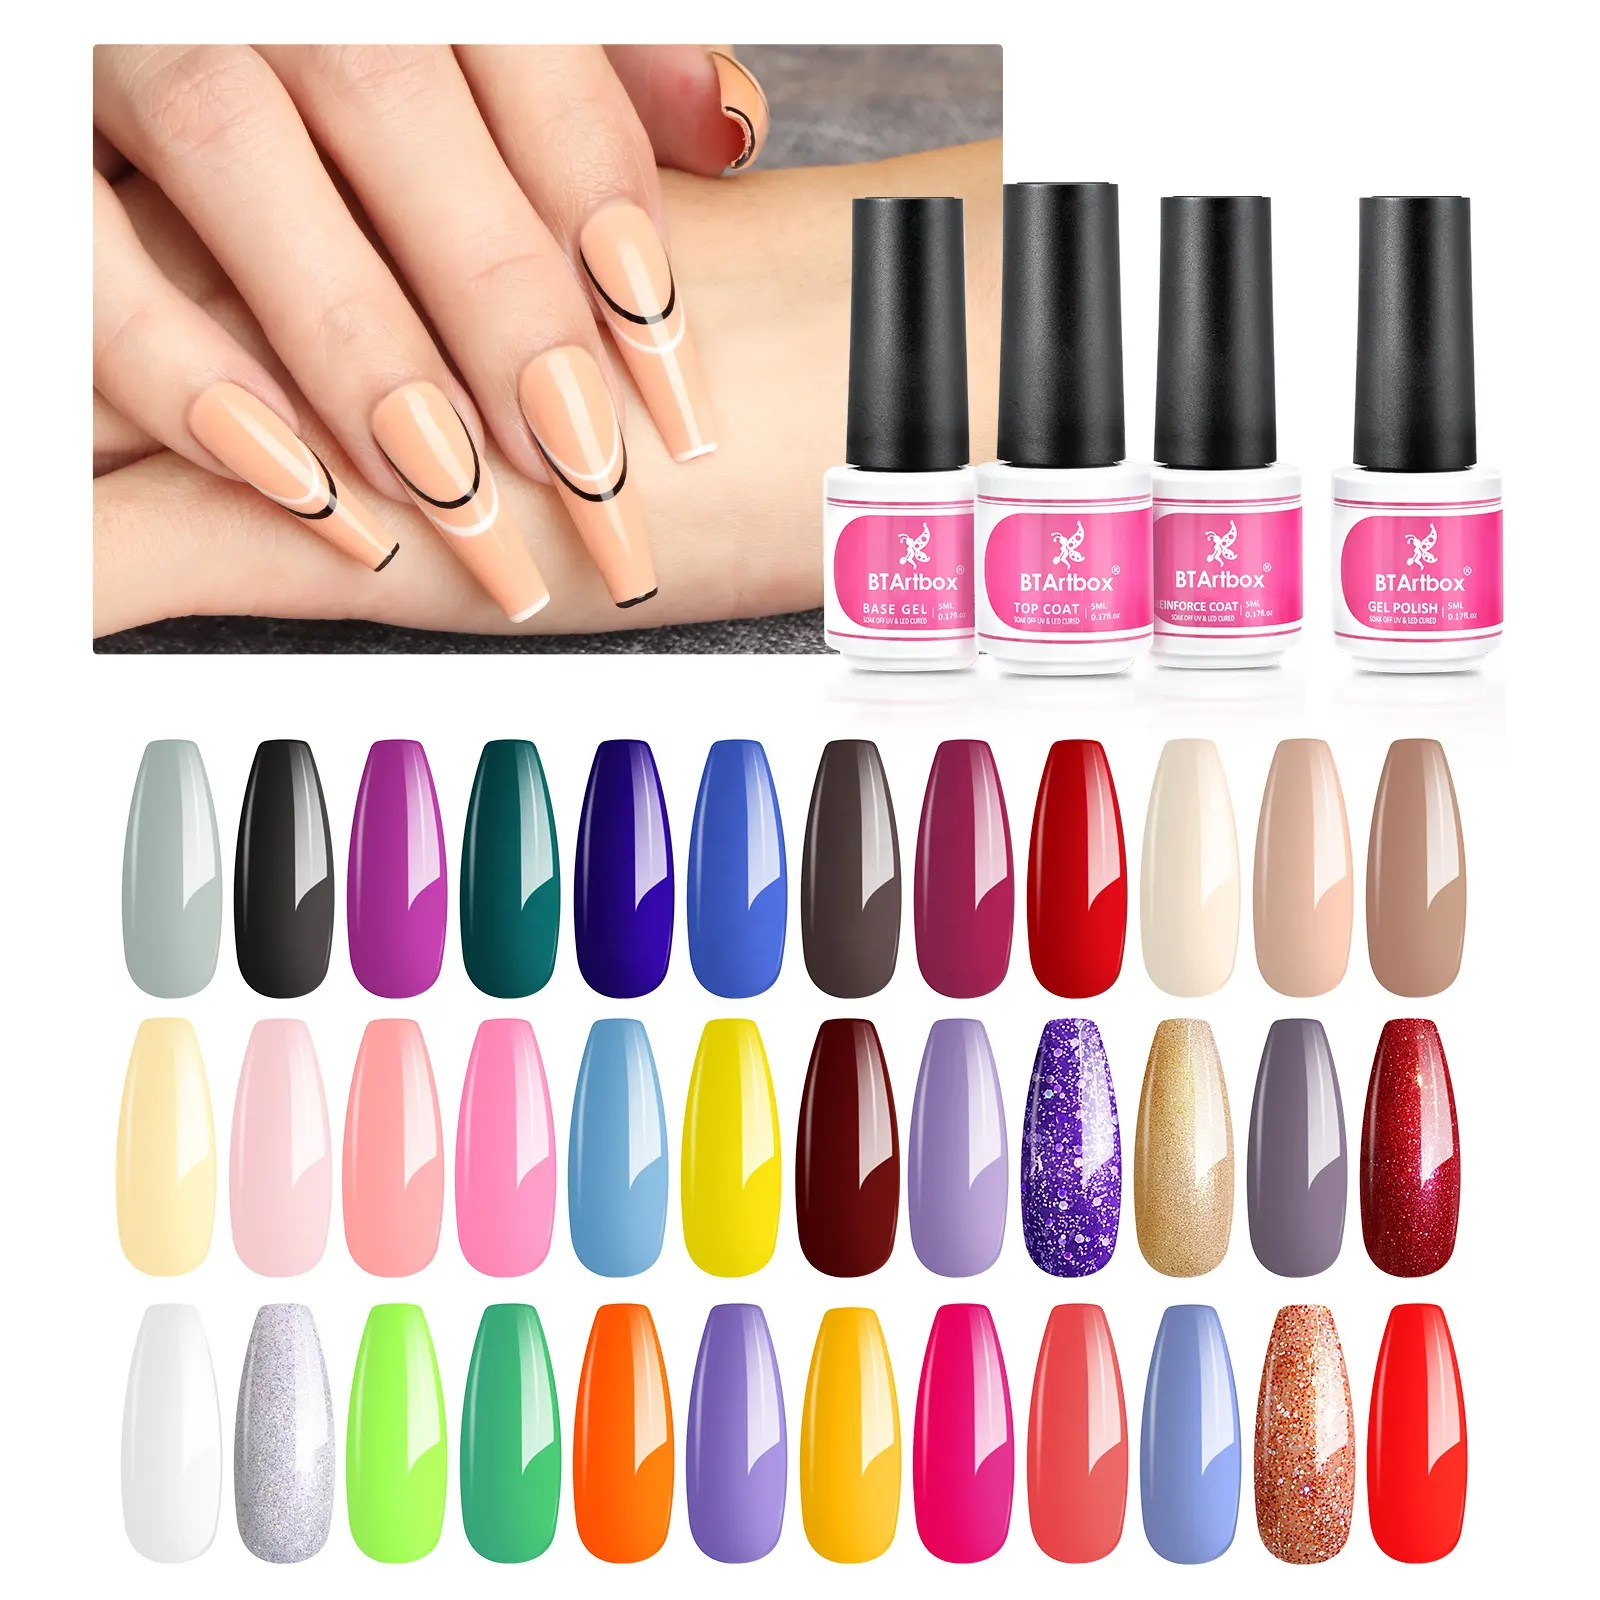 Gel Polish Rainbow Nude Neon Glitter 36 Colors Gel with Gel Top Coat Base Coat and Nail Strengthener for Nail Art Salon or DIY